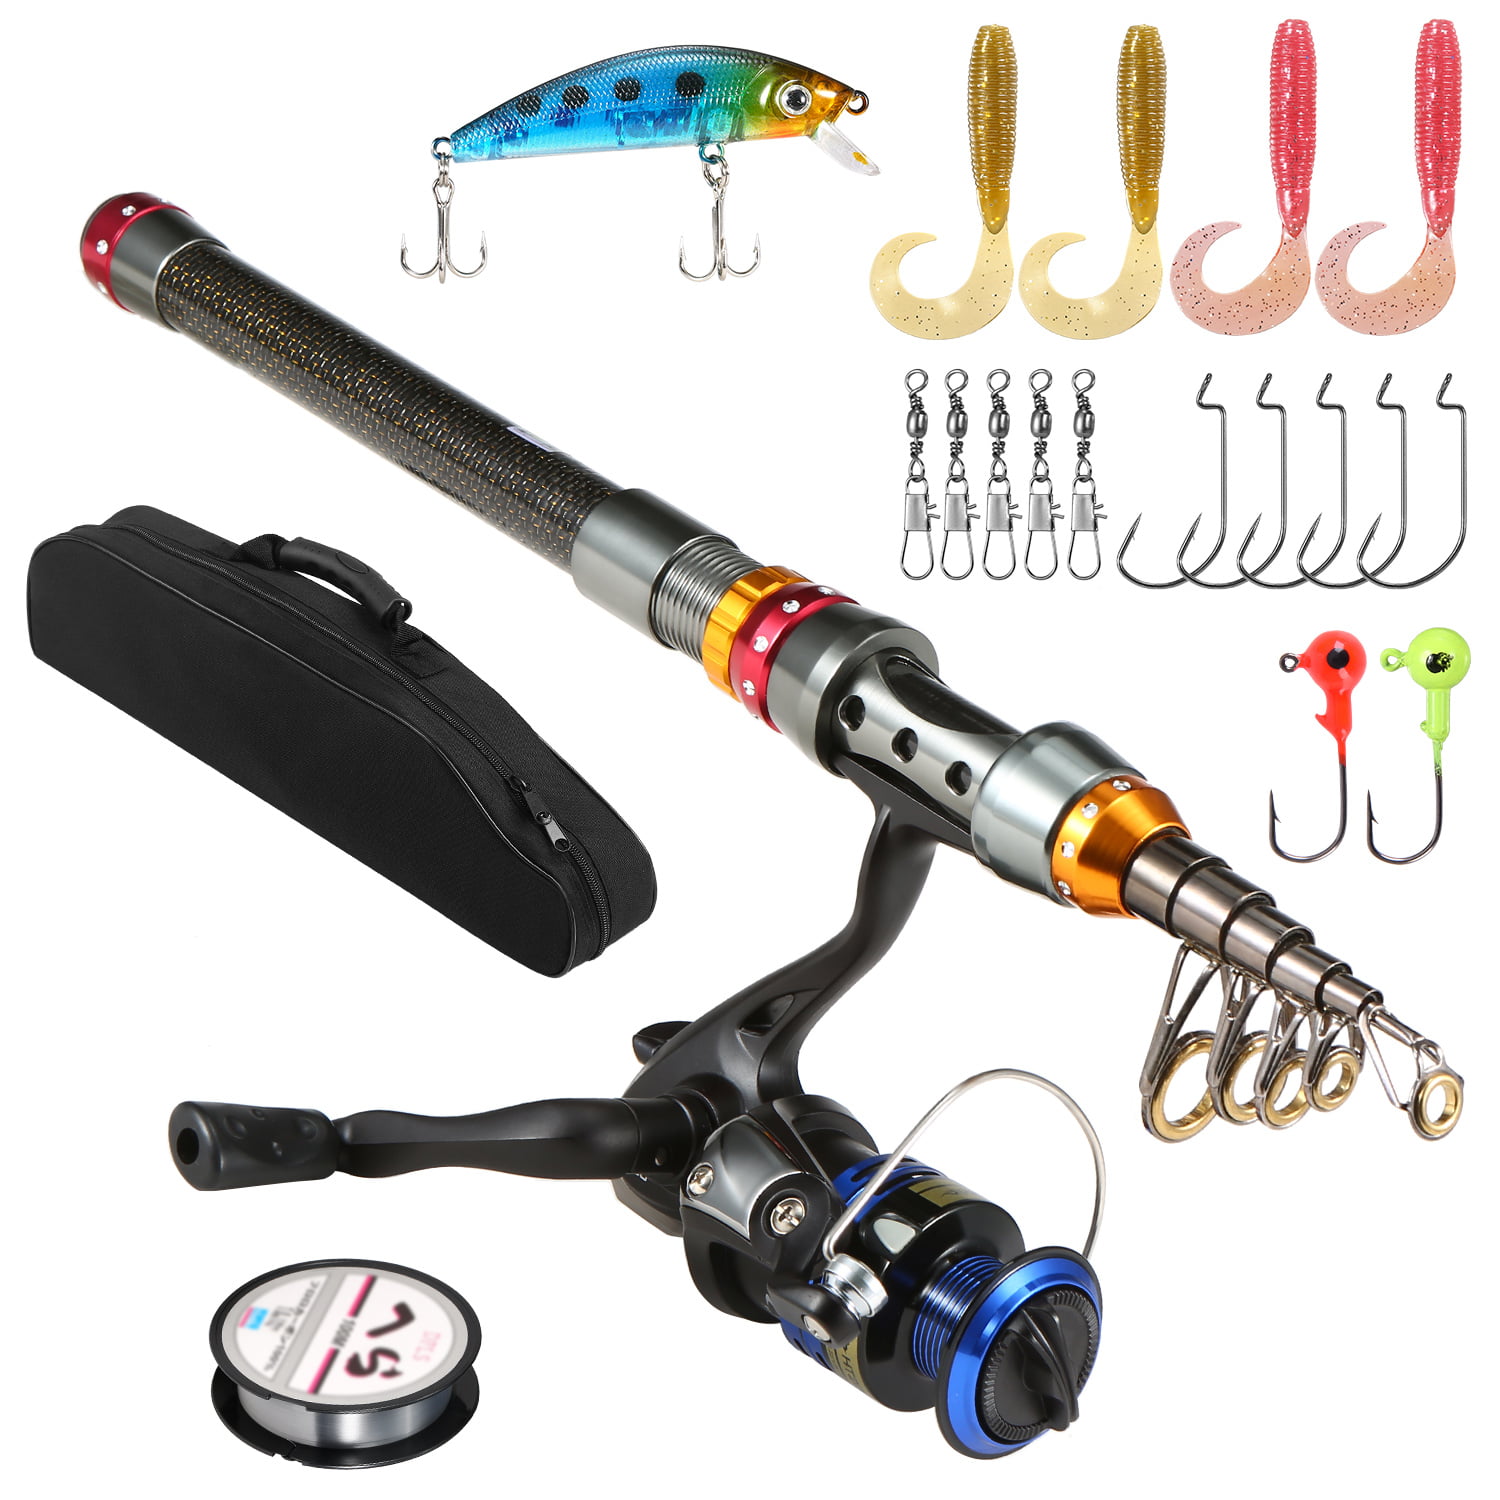 Full Kit Carbon Telescopic Fishing Rod with Reel Line Lures Hooks and Accessories Fishing Gear Sea Saltwater Freshwater Kit Fishing Full Kit 